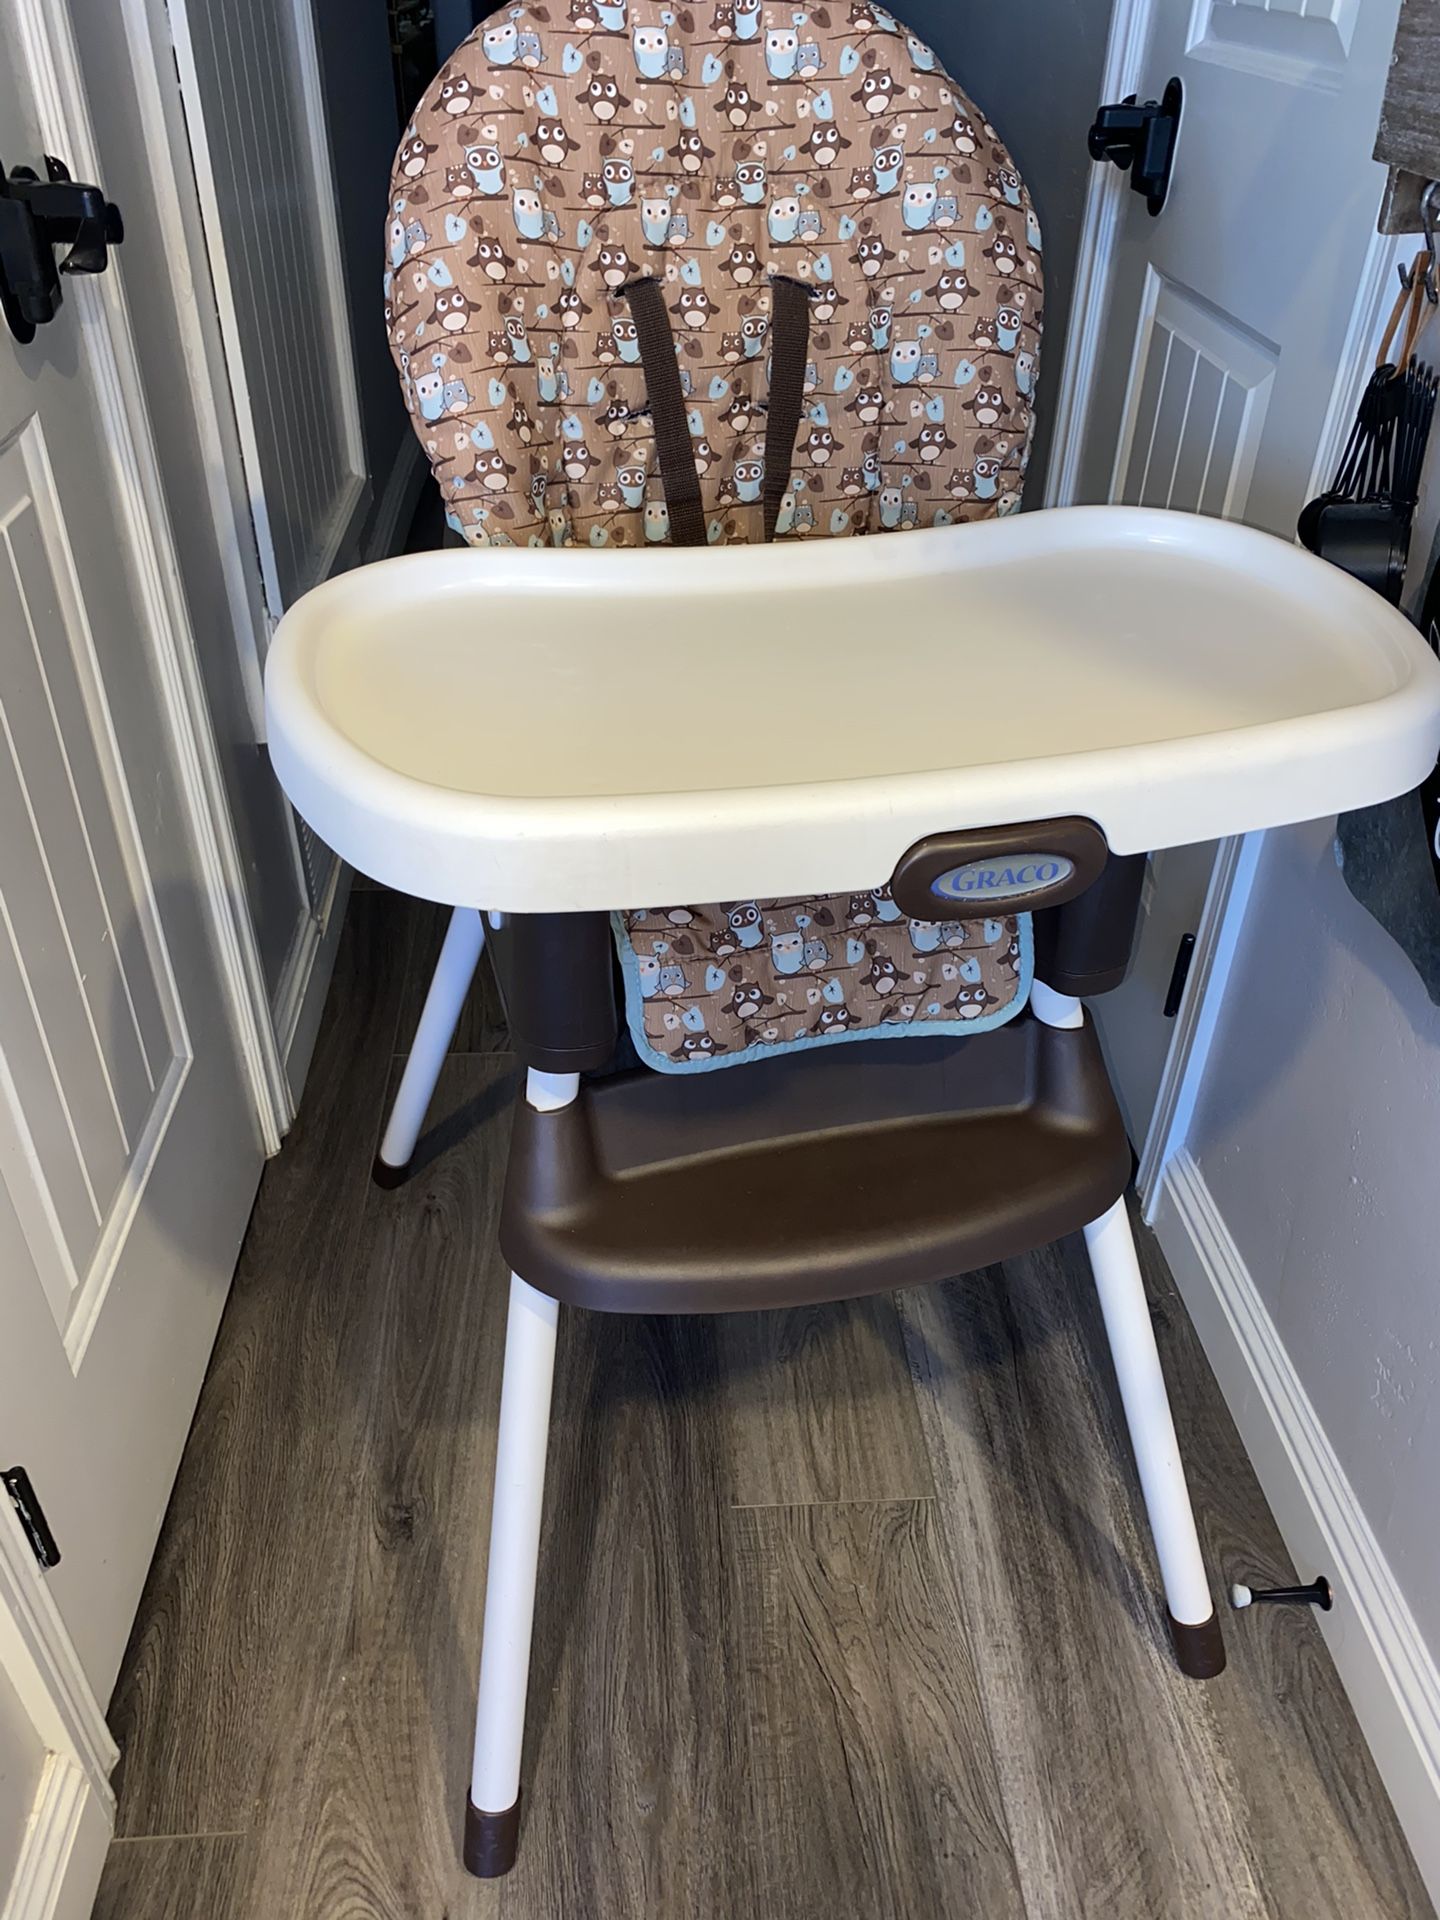 Graco SimpleSwitch 2-in-1 Convertible High Chair